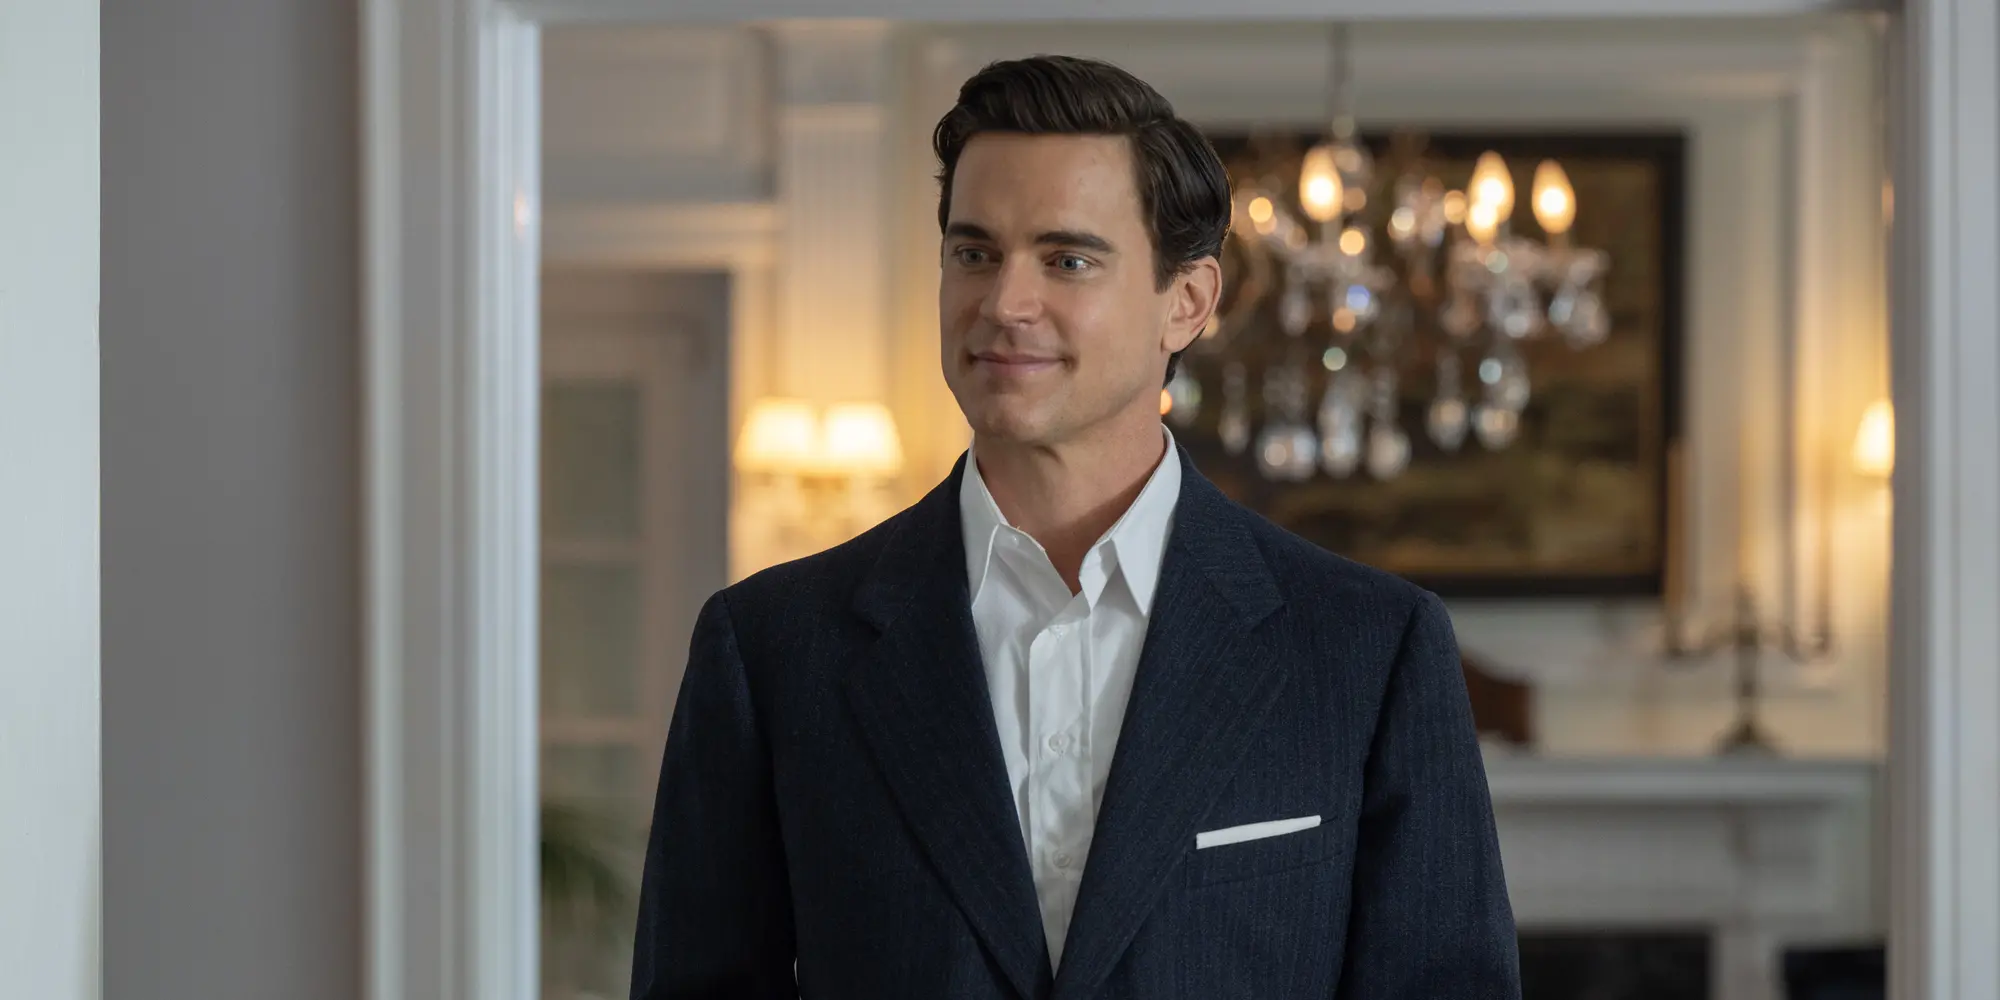 Matt Bomer (BFA, 2000), who is nominated for Outstanding Lead Actor in a Limited or Anthology Series or Movie for his role as Hawkins “Hawk” Fuller in Showtime’s “Fellow Travelers.”